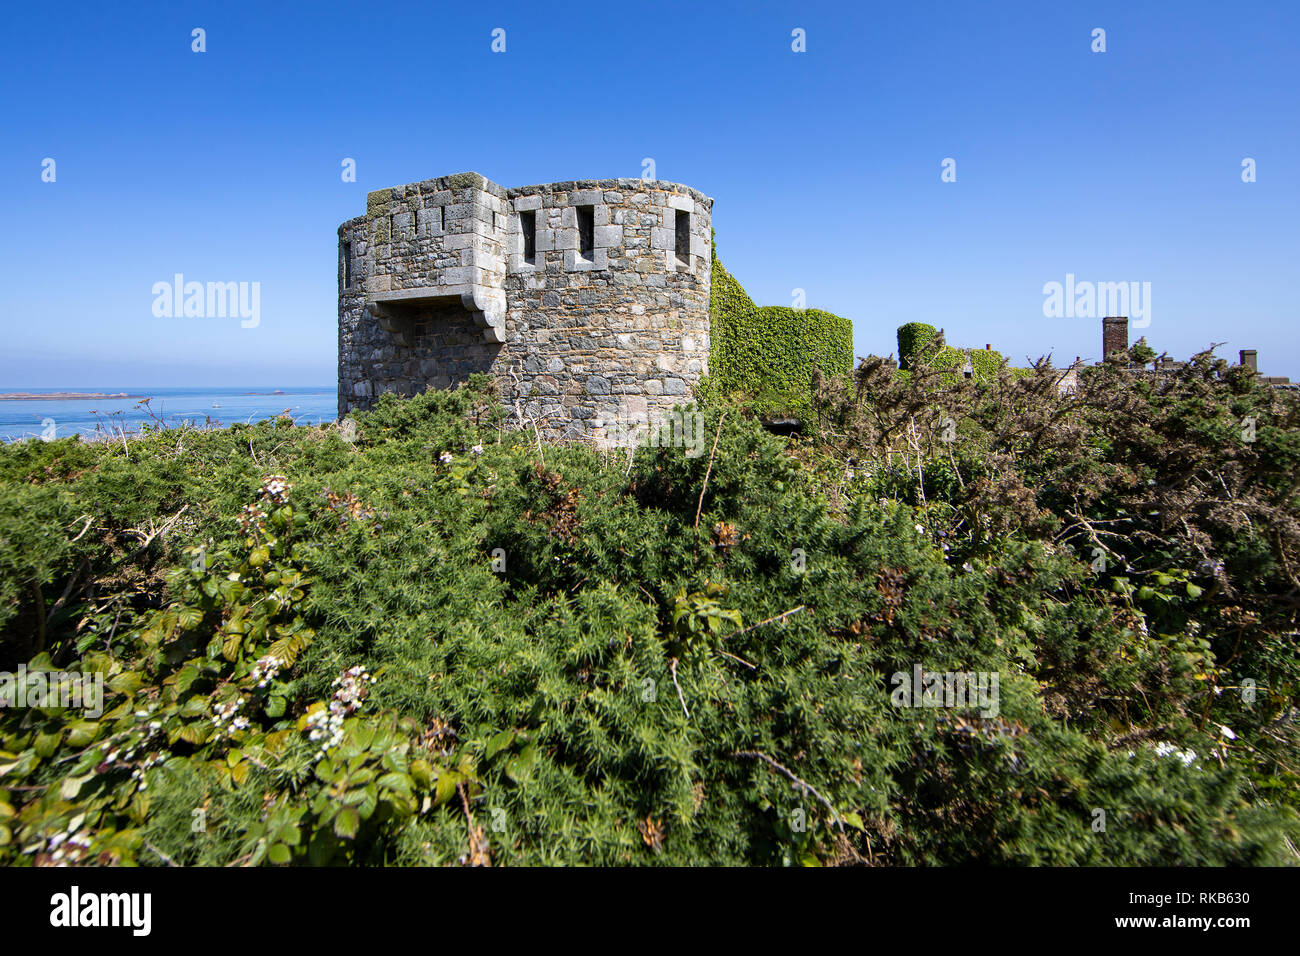 The most inland tower of Fort Tourgis on Alderney, showing the inaccessability of the fort. Stock Photo